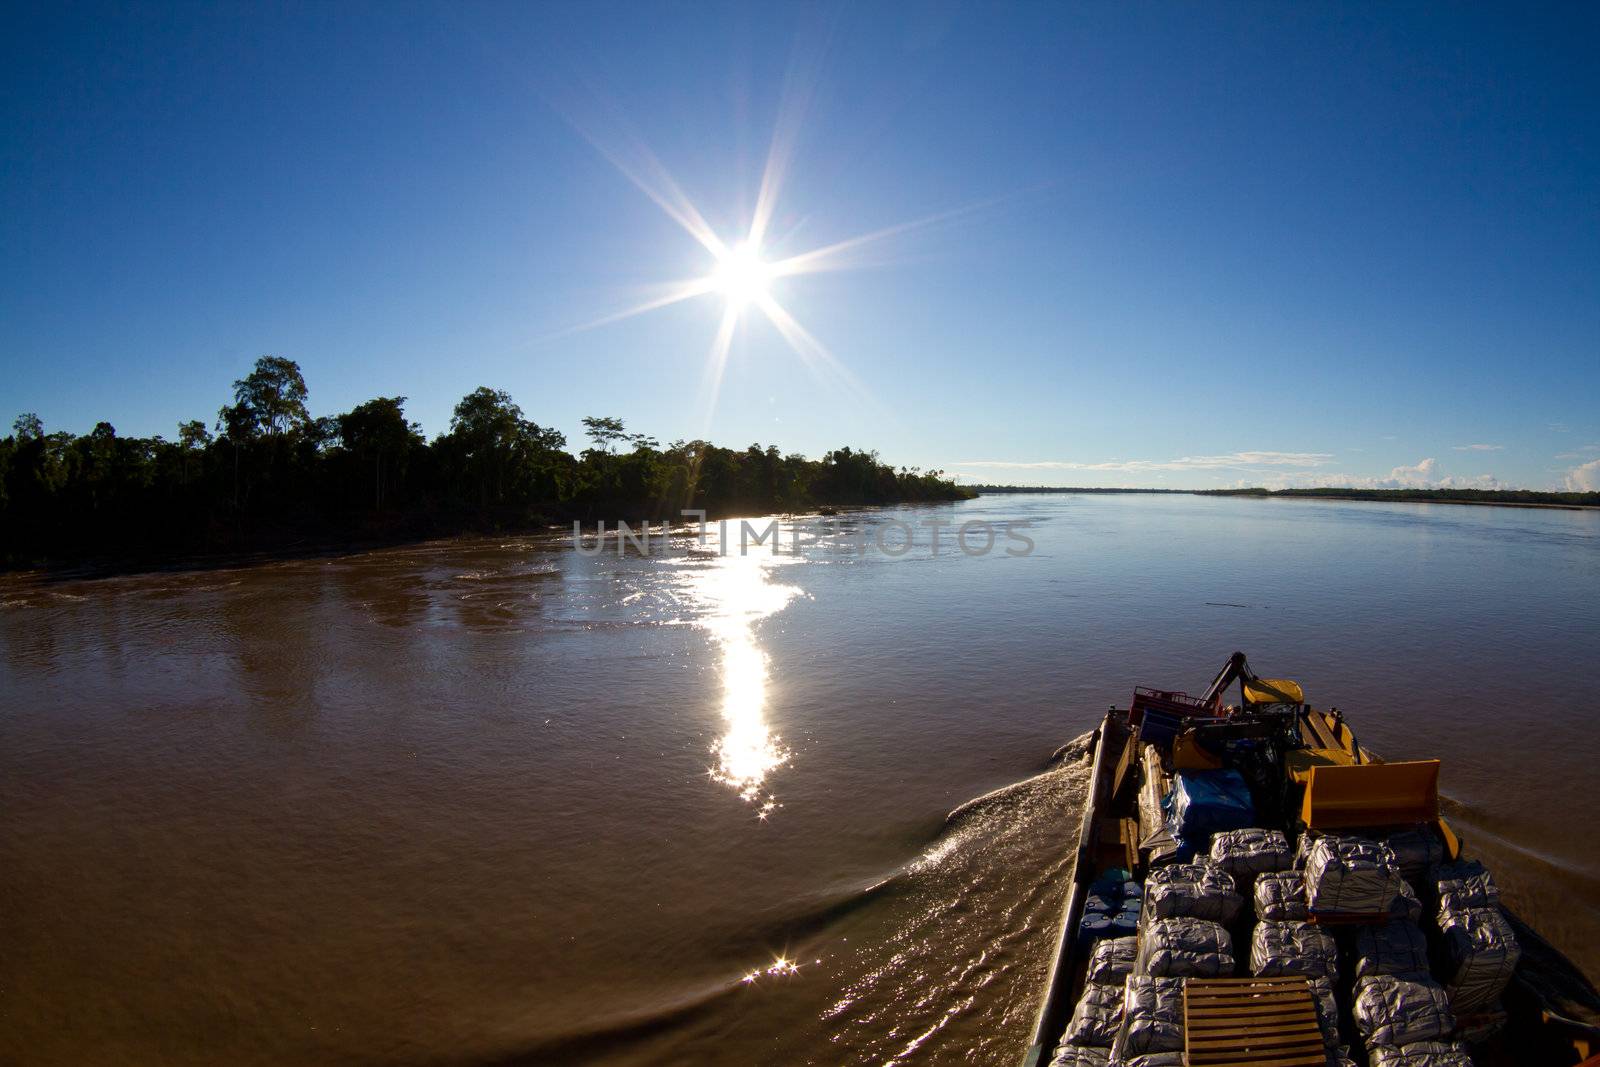 A large cargo ship moves slowly up the river Amazon to unload its cargo.